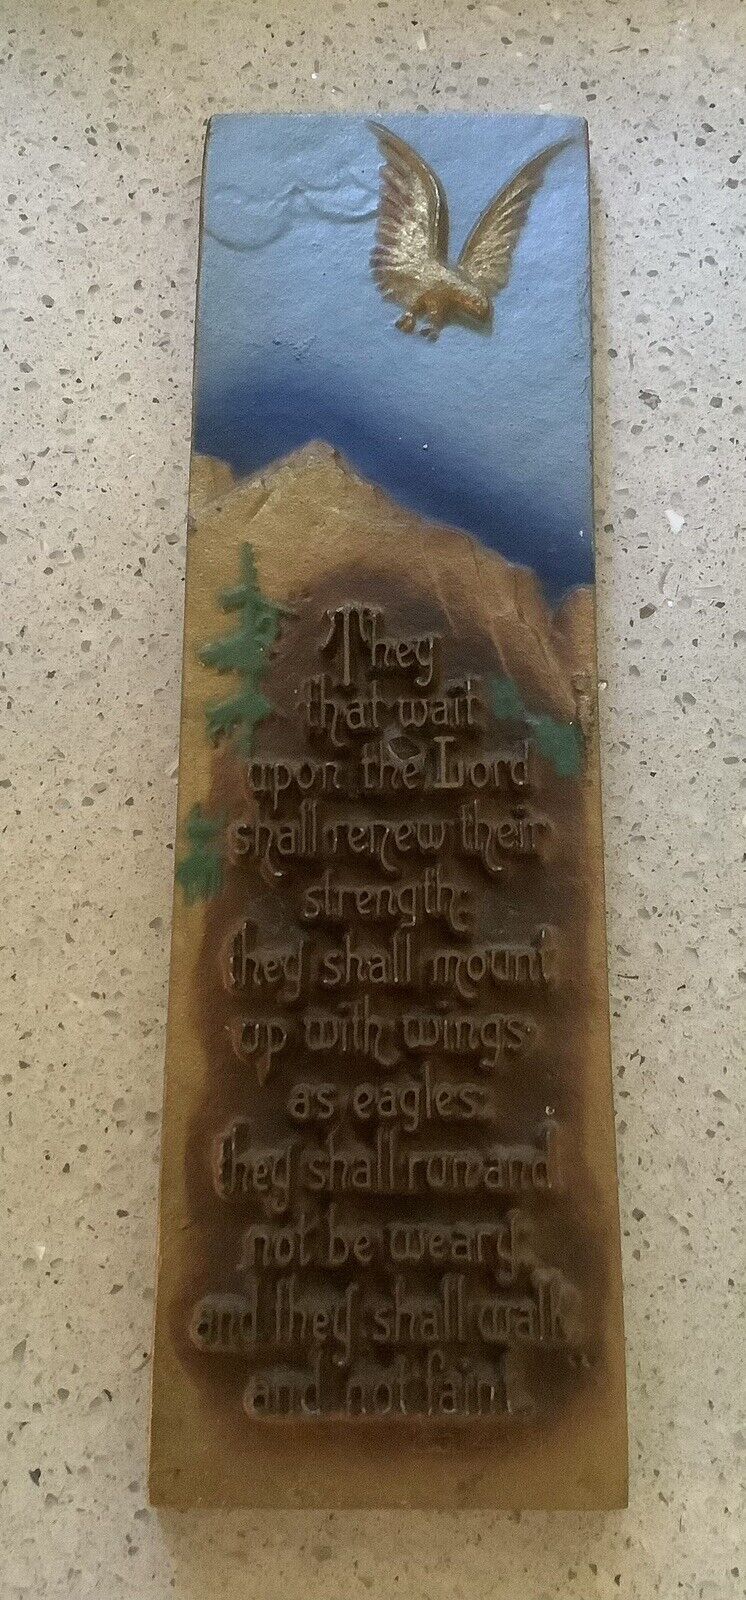 Antique Metal Plaque With Isaiah 40:31 Quote, Very Good Condition, Nice Paint